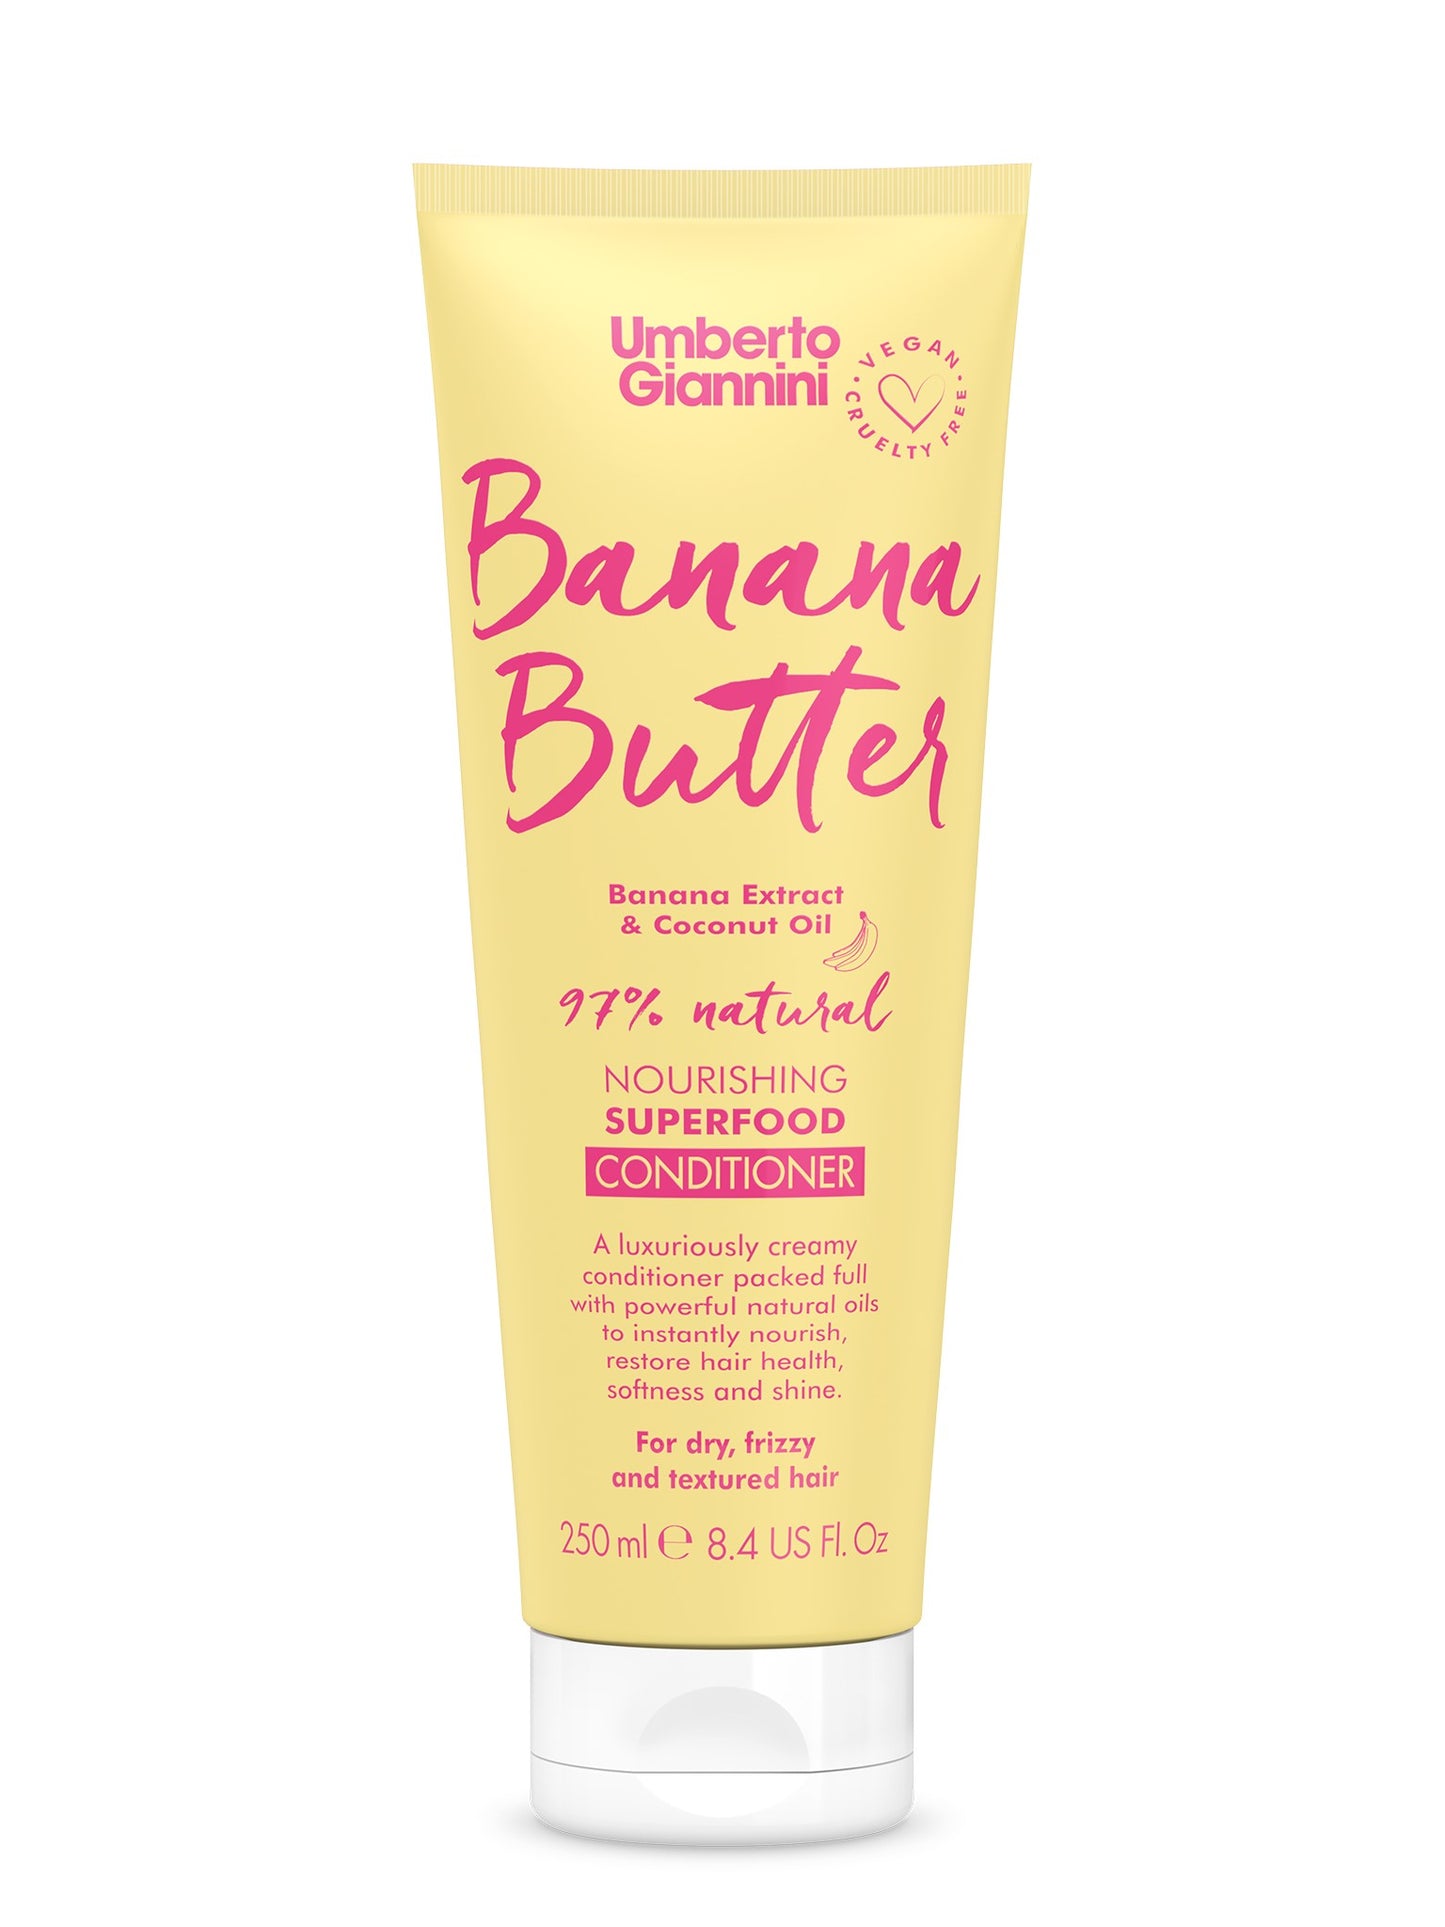 banana butter superfood conditioner